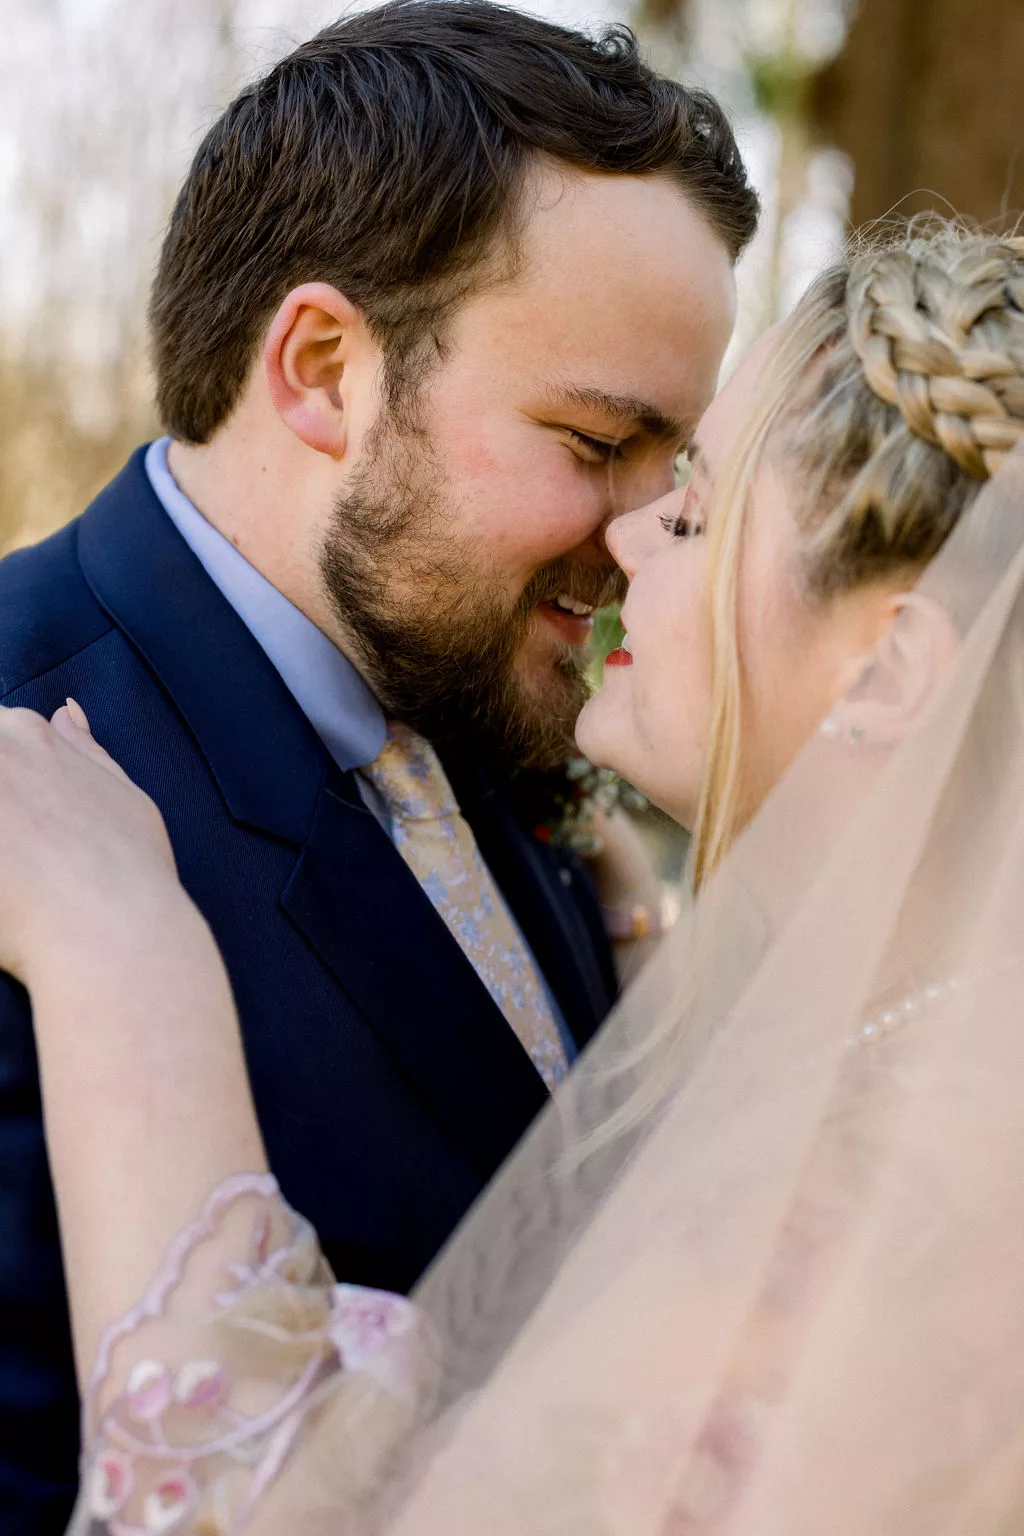 Newlyweds lean in for a kiss while smiling